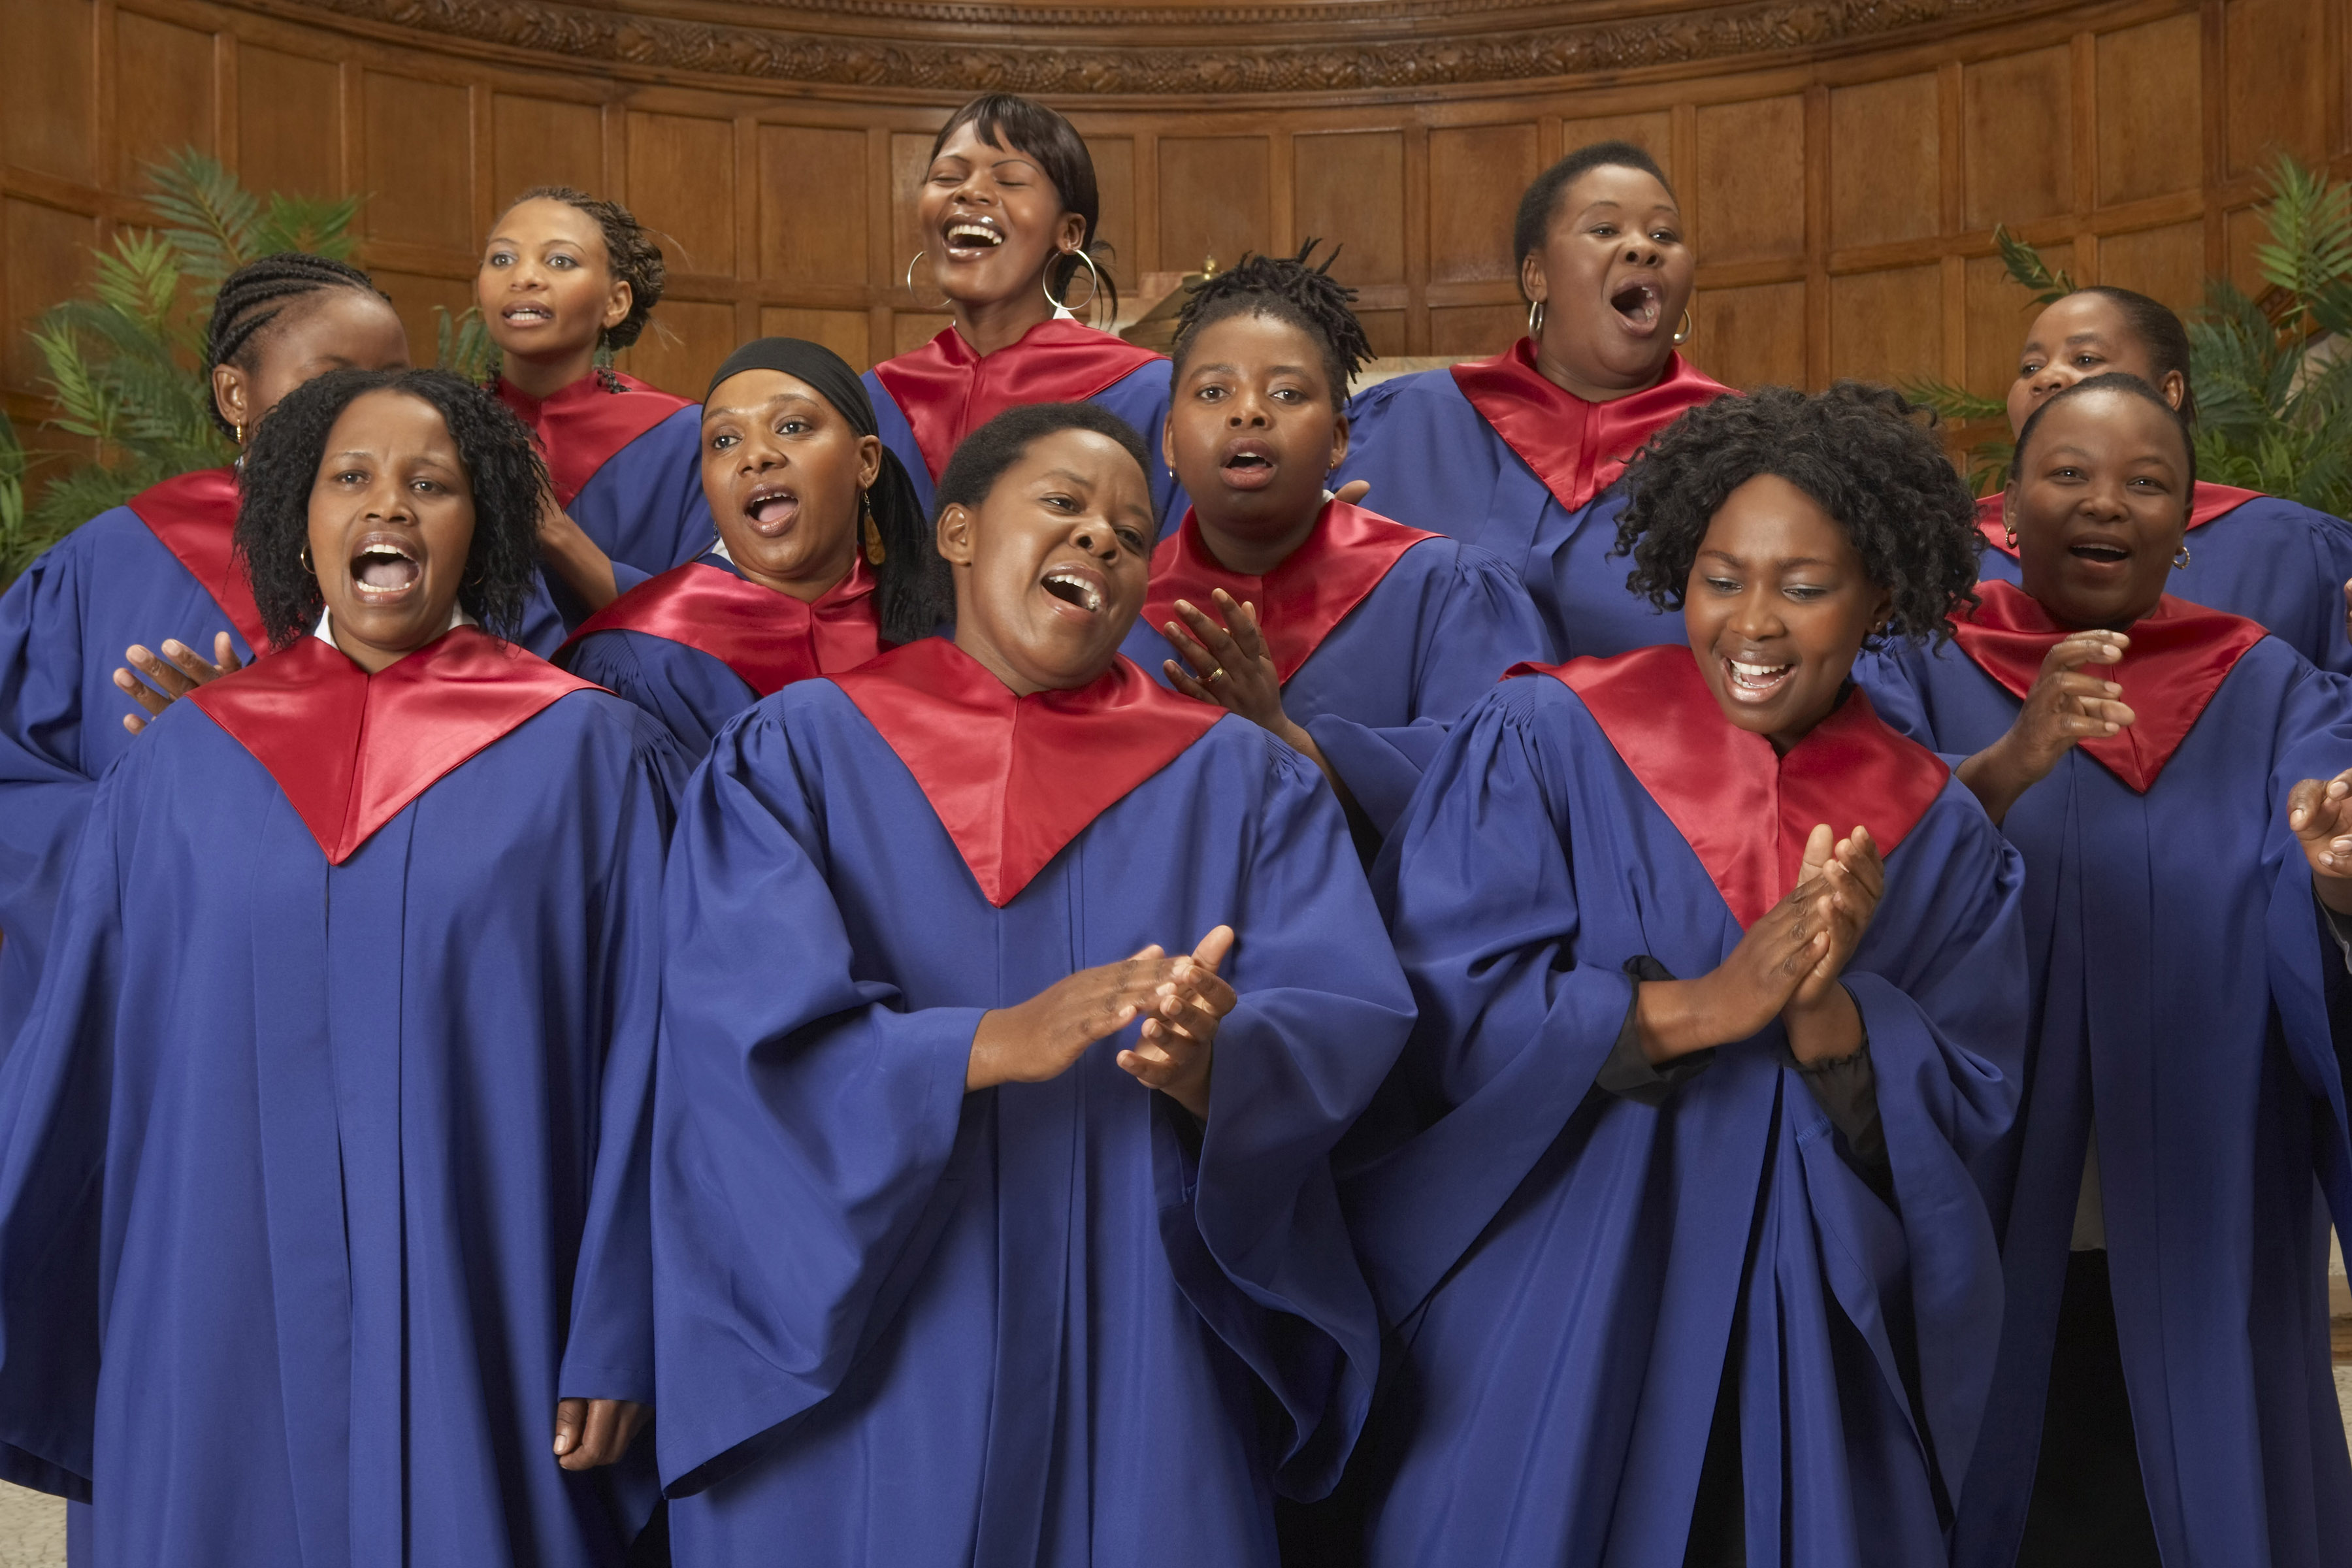 GettyImages 77088588 Gospelchoir Cropped 